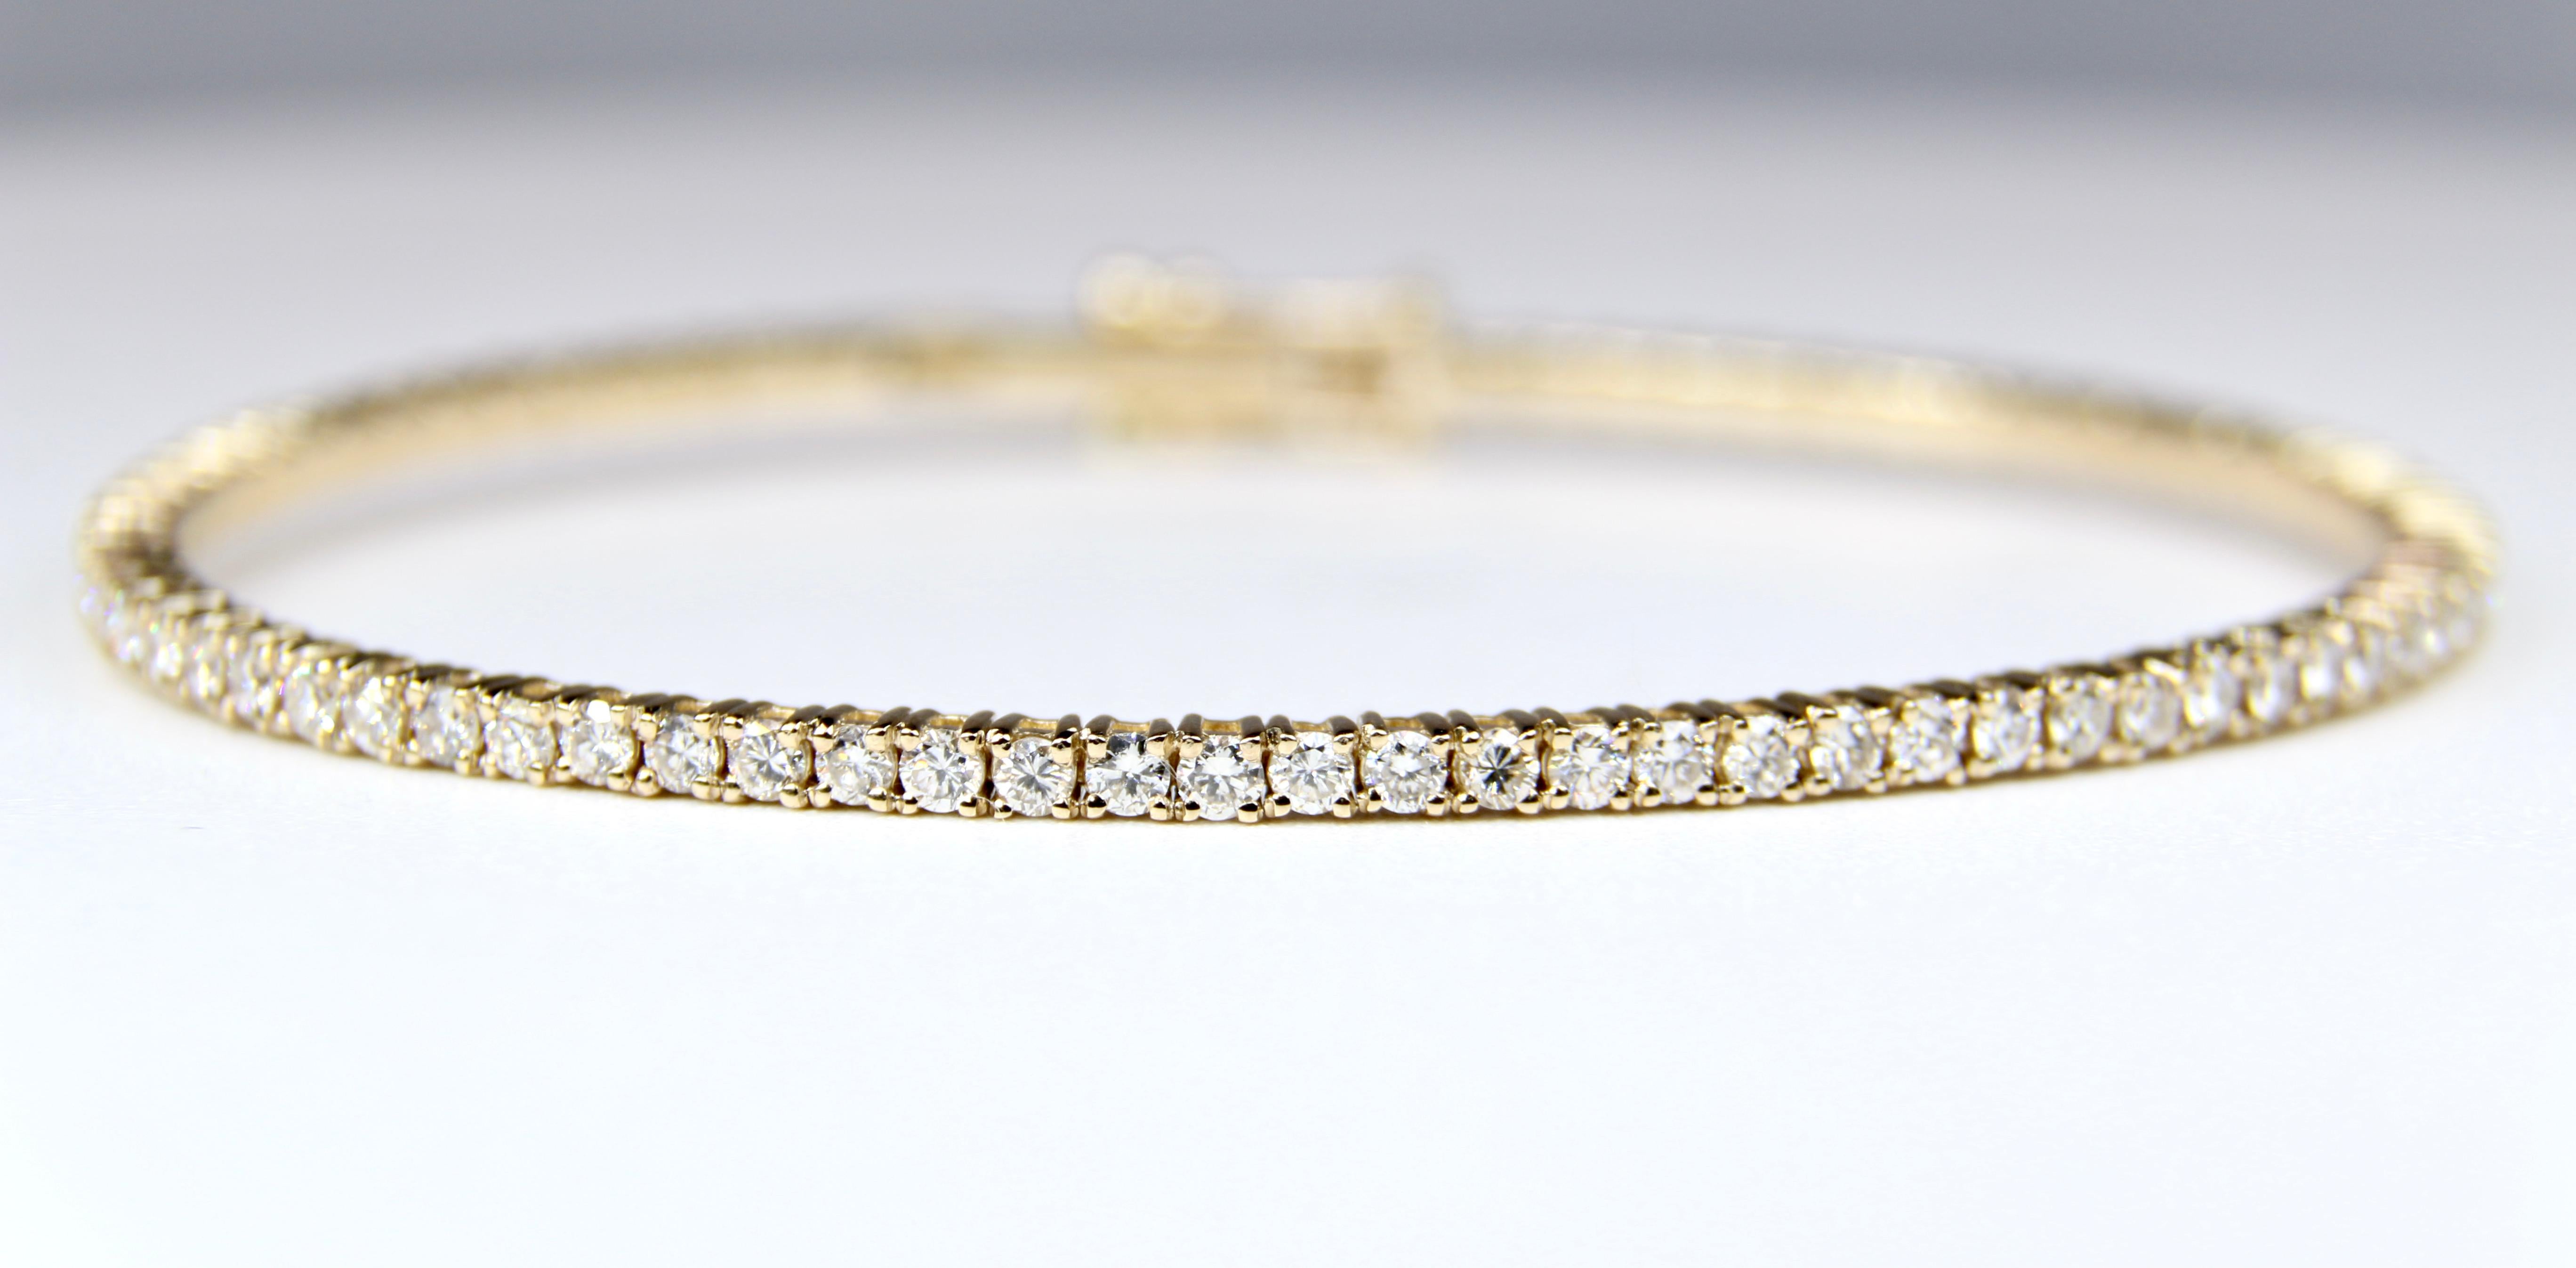 14K yellow gold and 74 round diamond flexible bangle bracelet. 
2 carats total weight, G-H color, VS2-SI1 clarity. The diamonds are set in 4 prongs.
The bracelet weighs 9.2 grams. Snap in clasp with Two figure 8 safety clasps.
7 inch bracelet, a